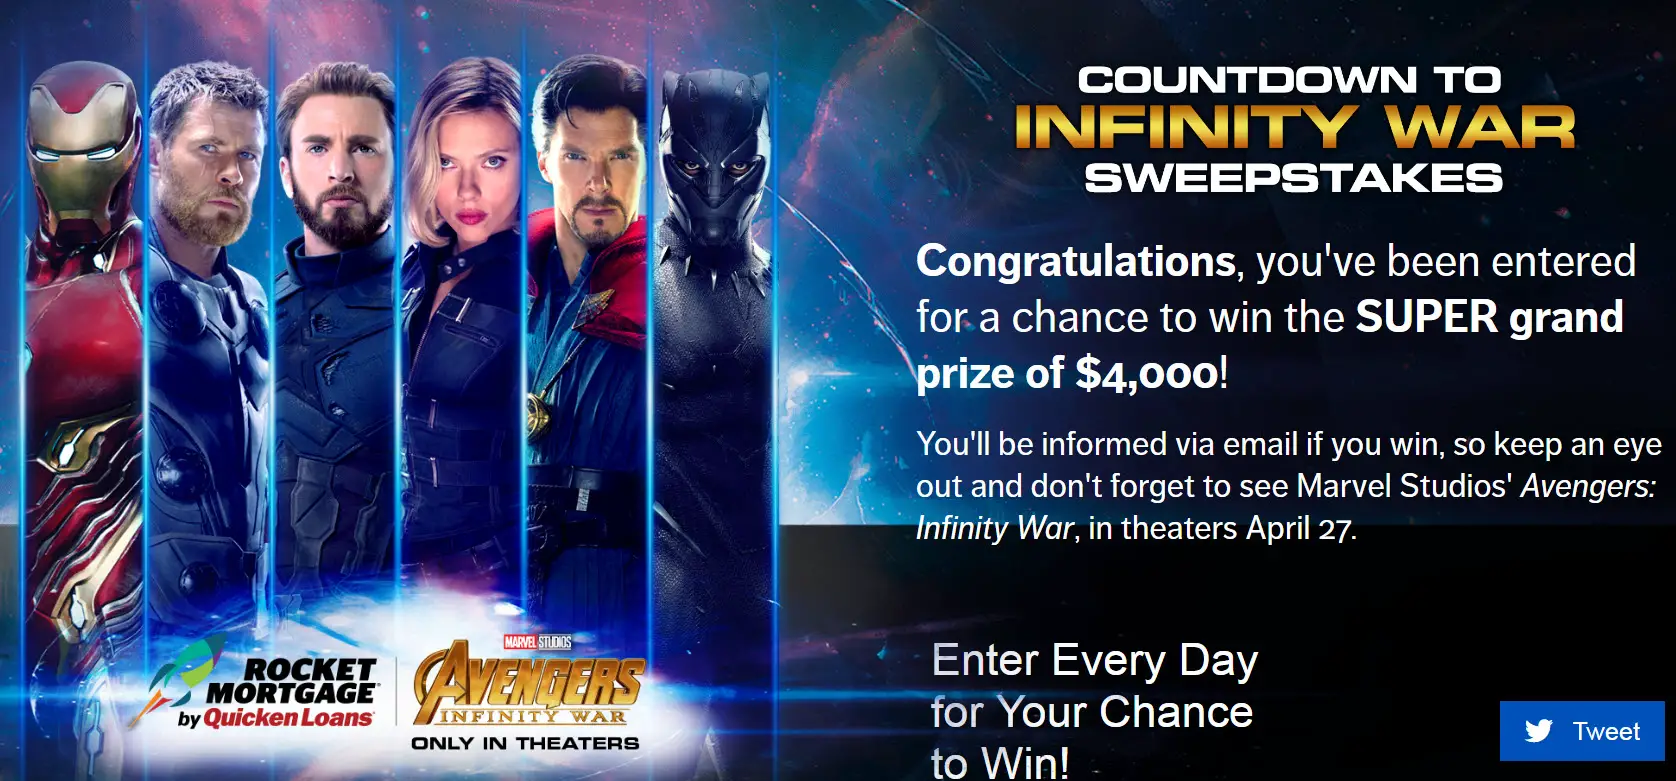 The Countdown to Infinity War Instant Win Game